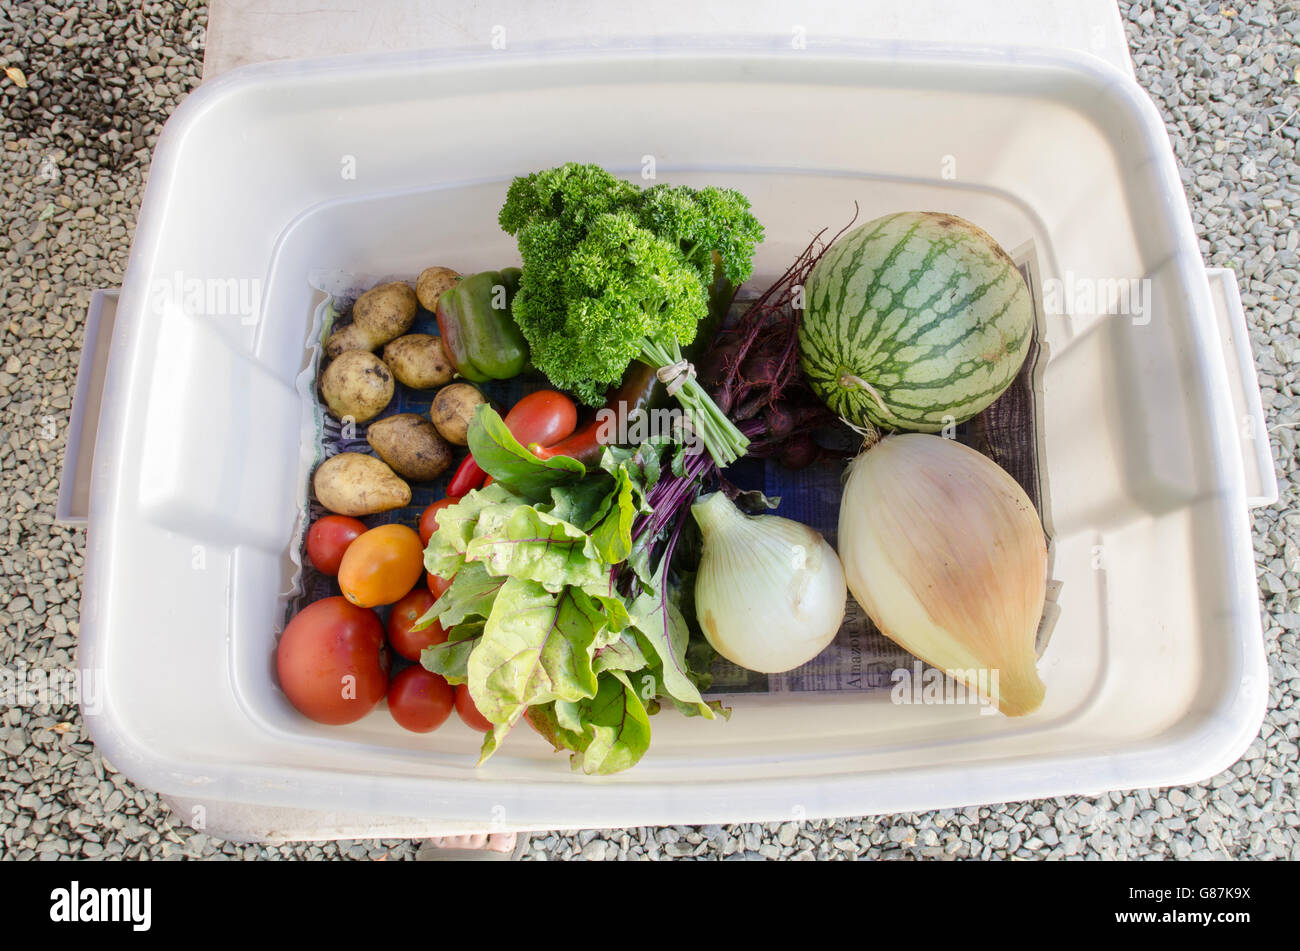 Plastic bin with freshly harvested produce. This is a weekly CSA (Community Supported Agriculture) share from a farm in Oregon. Stock Photo